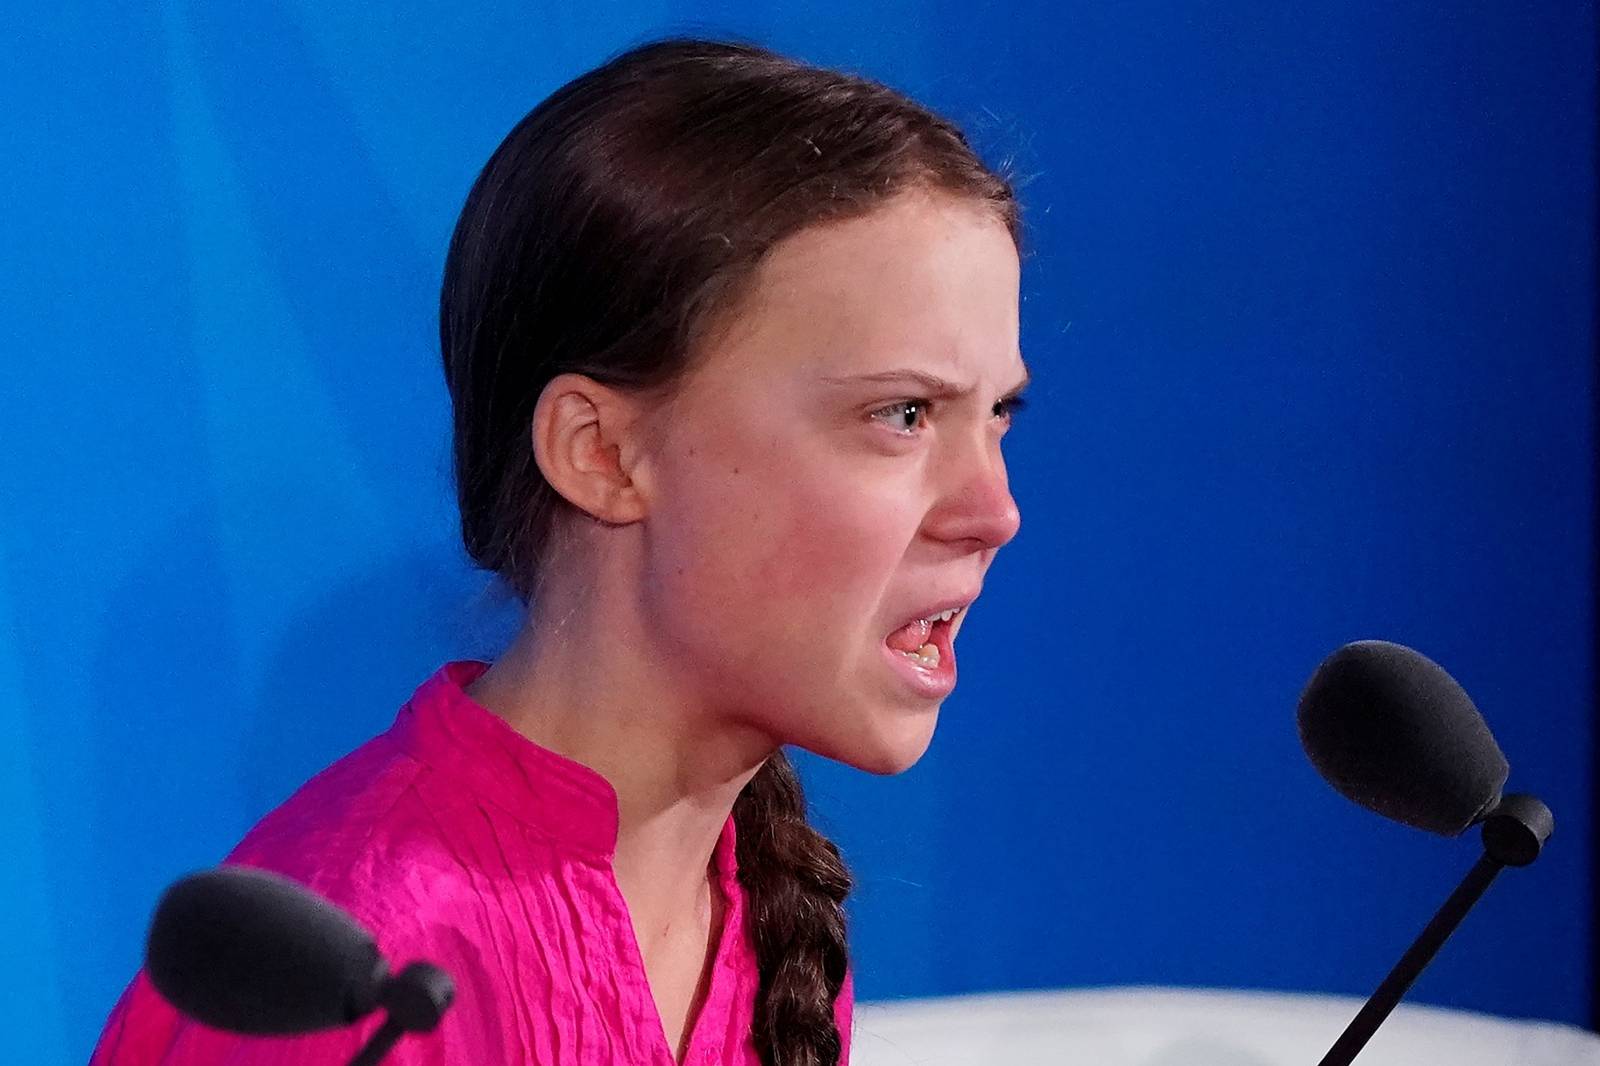 Swedish environmental activist Greta Thunberg speaks during the Climate Action Summit at United Nations HQ in the Manhattan borough of New York